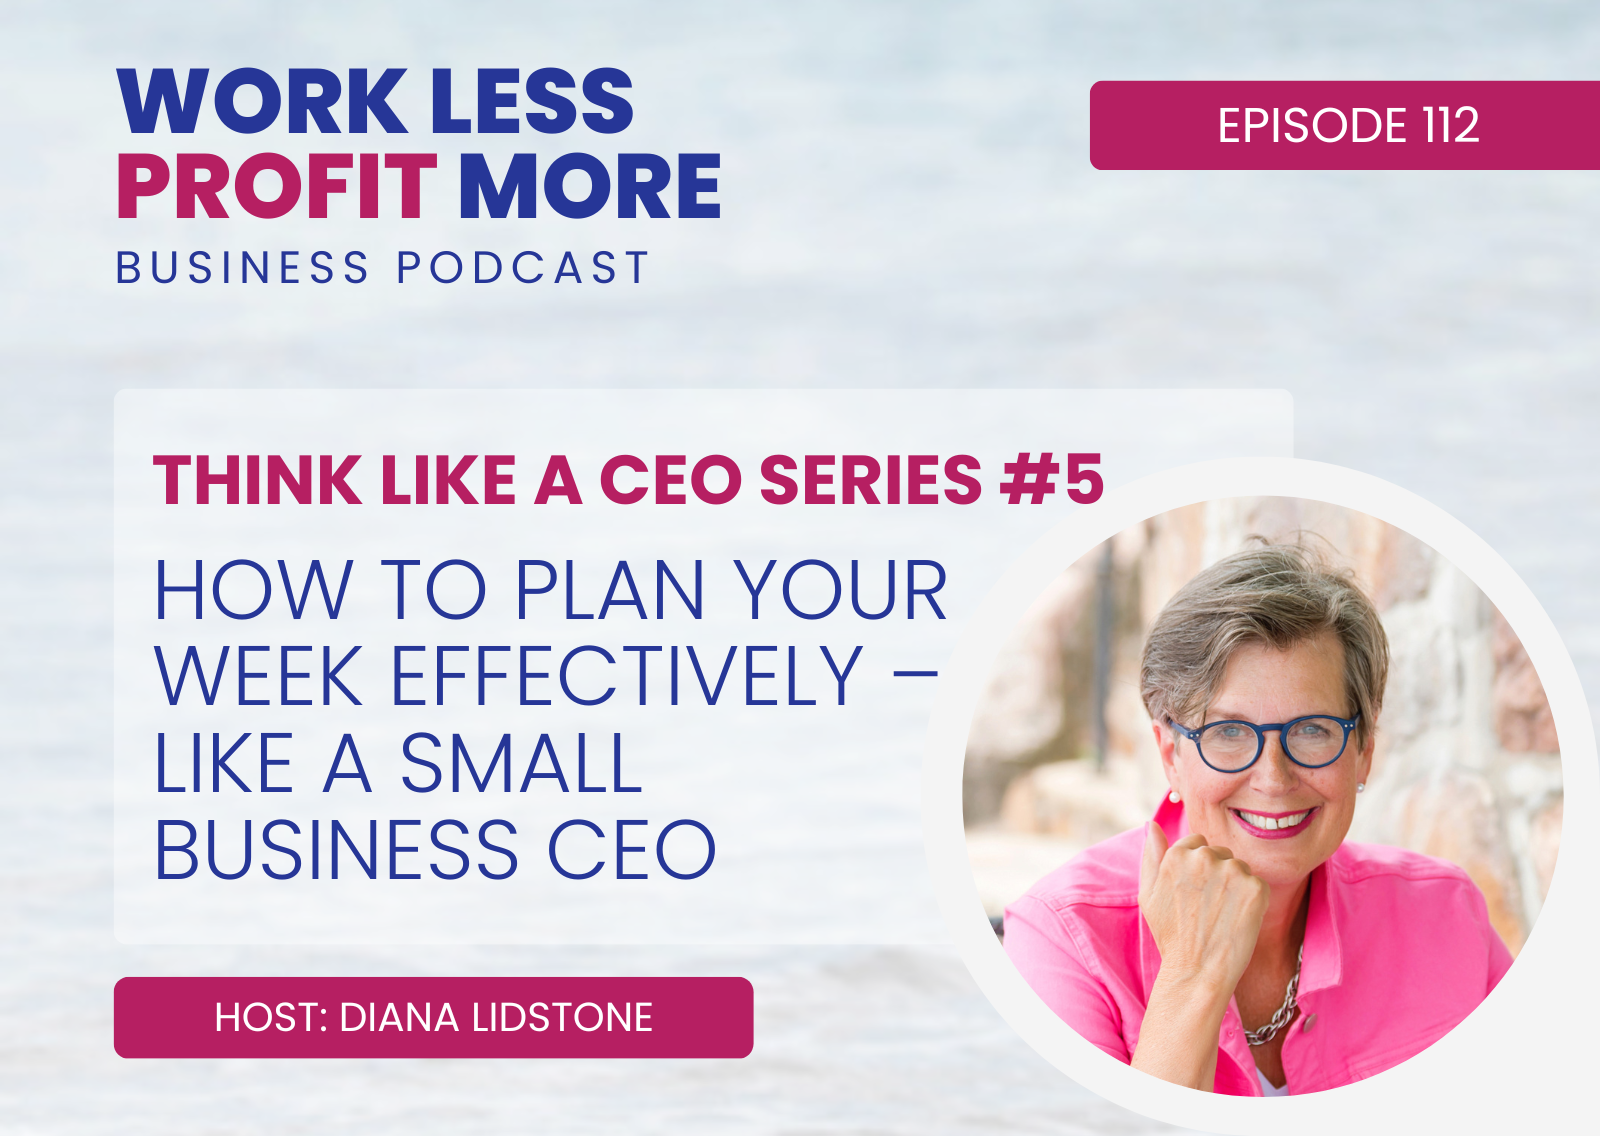 How to Plan Your Week Effectively – Like a Small Business CEO